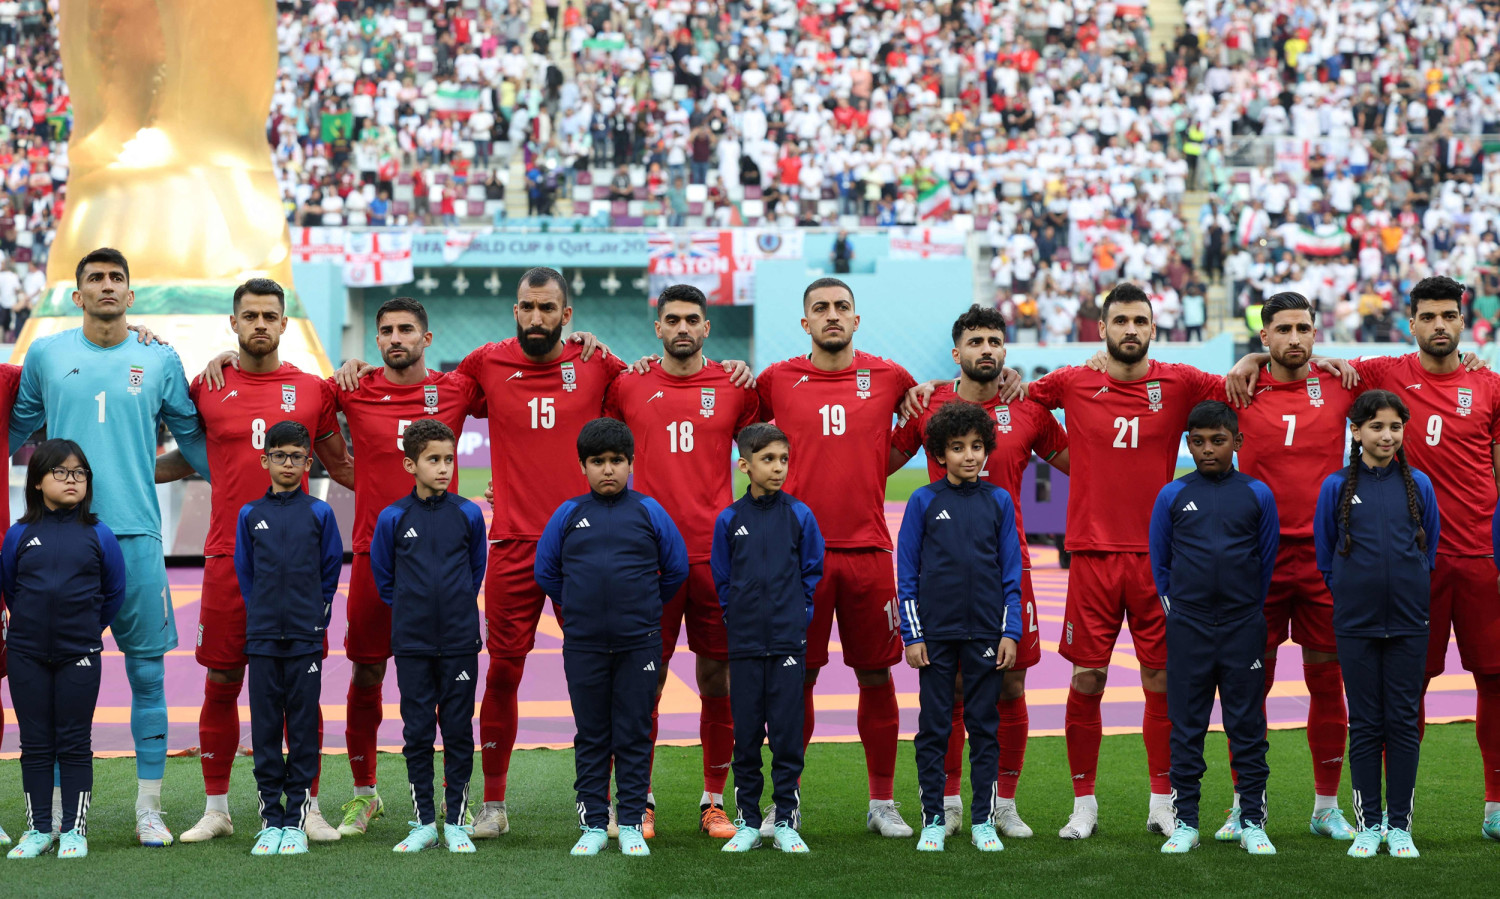 Iran soccer team silent during national anthem at World Cup game